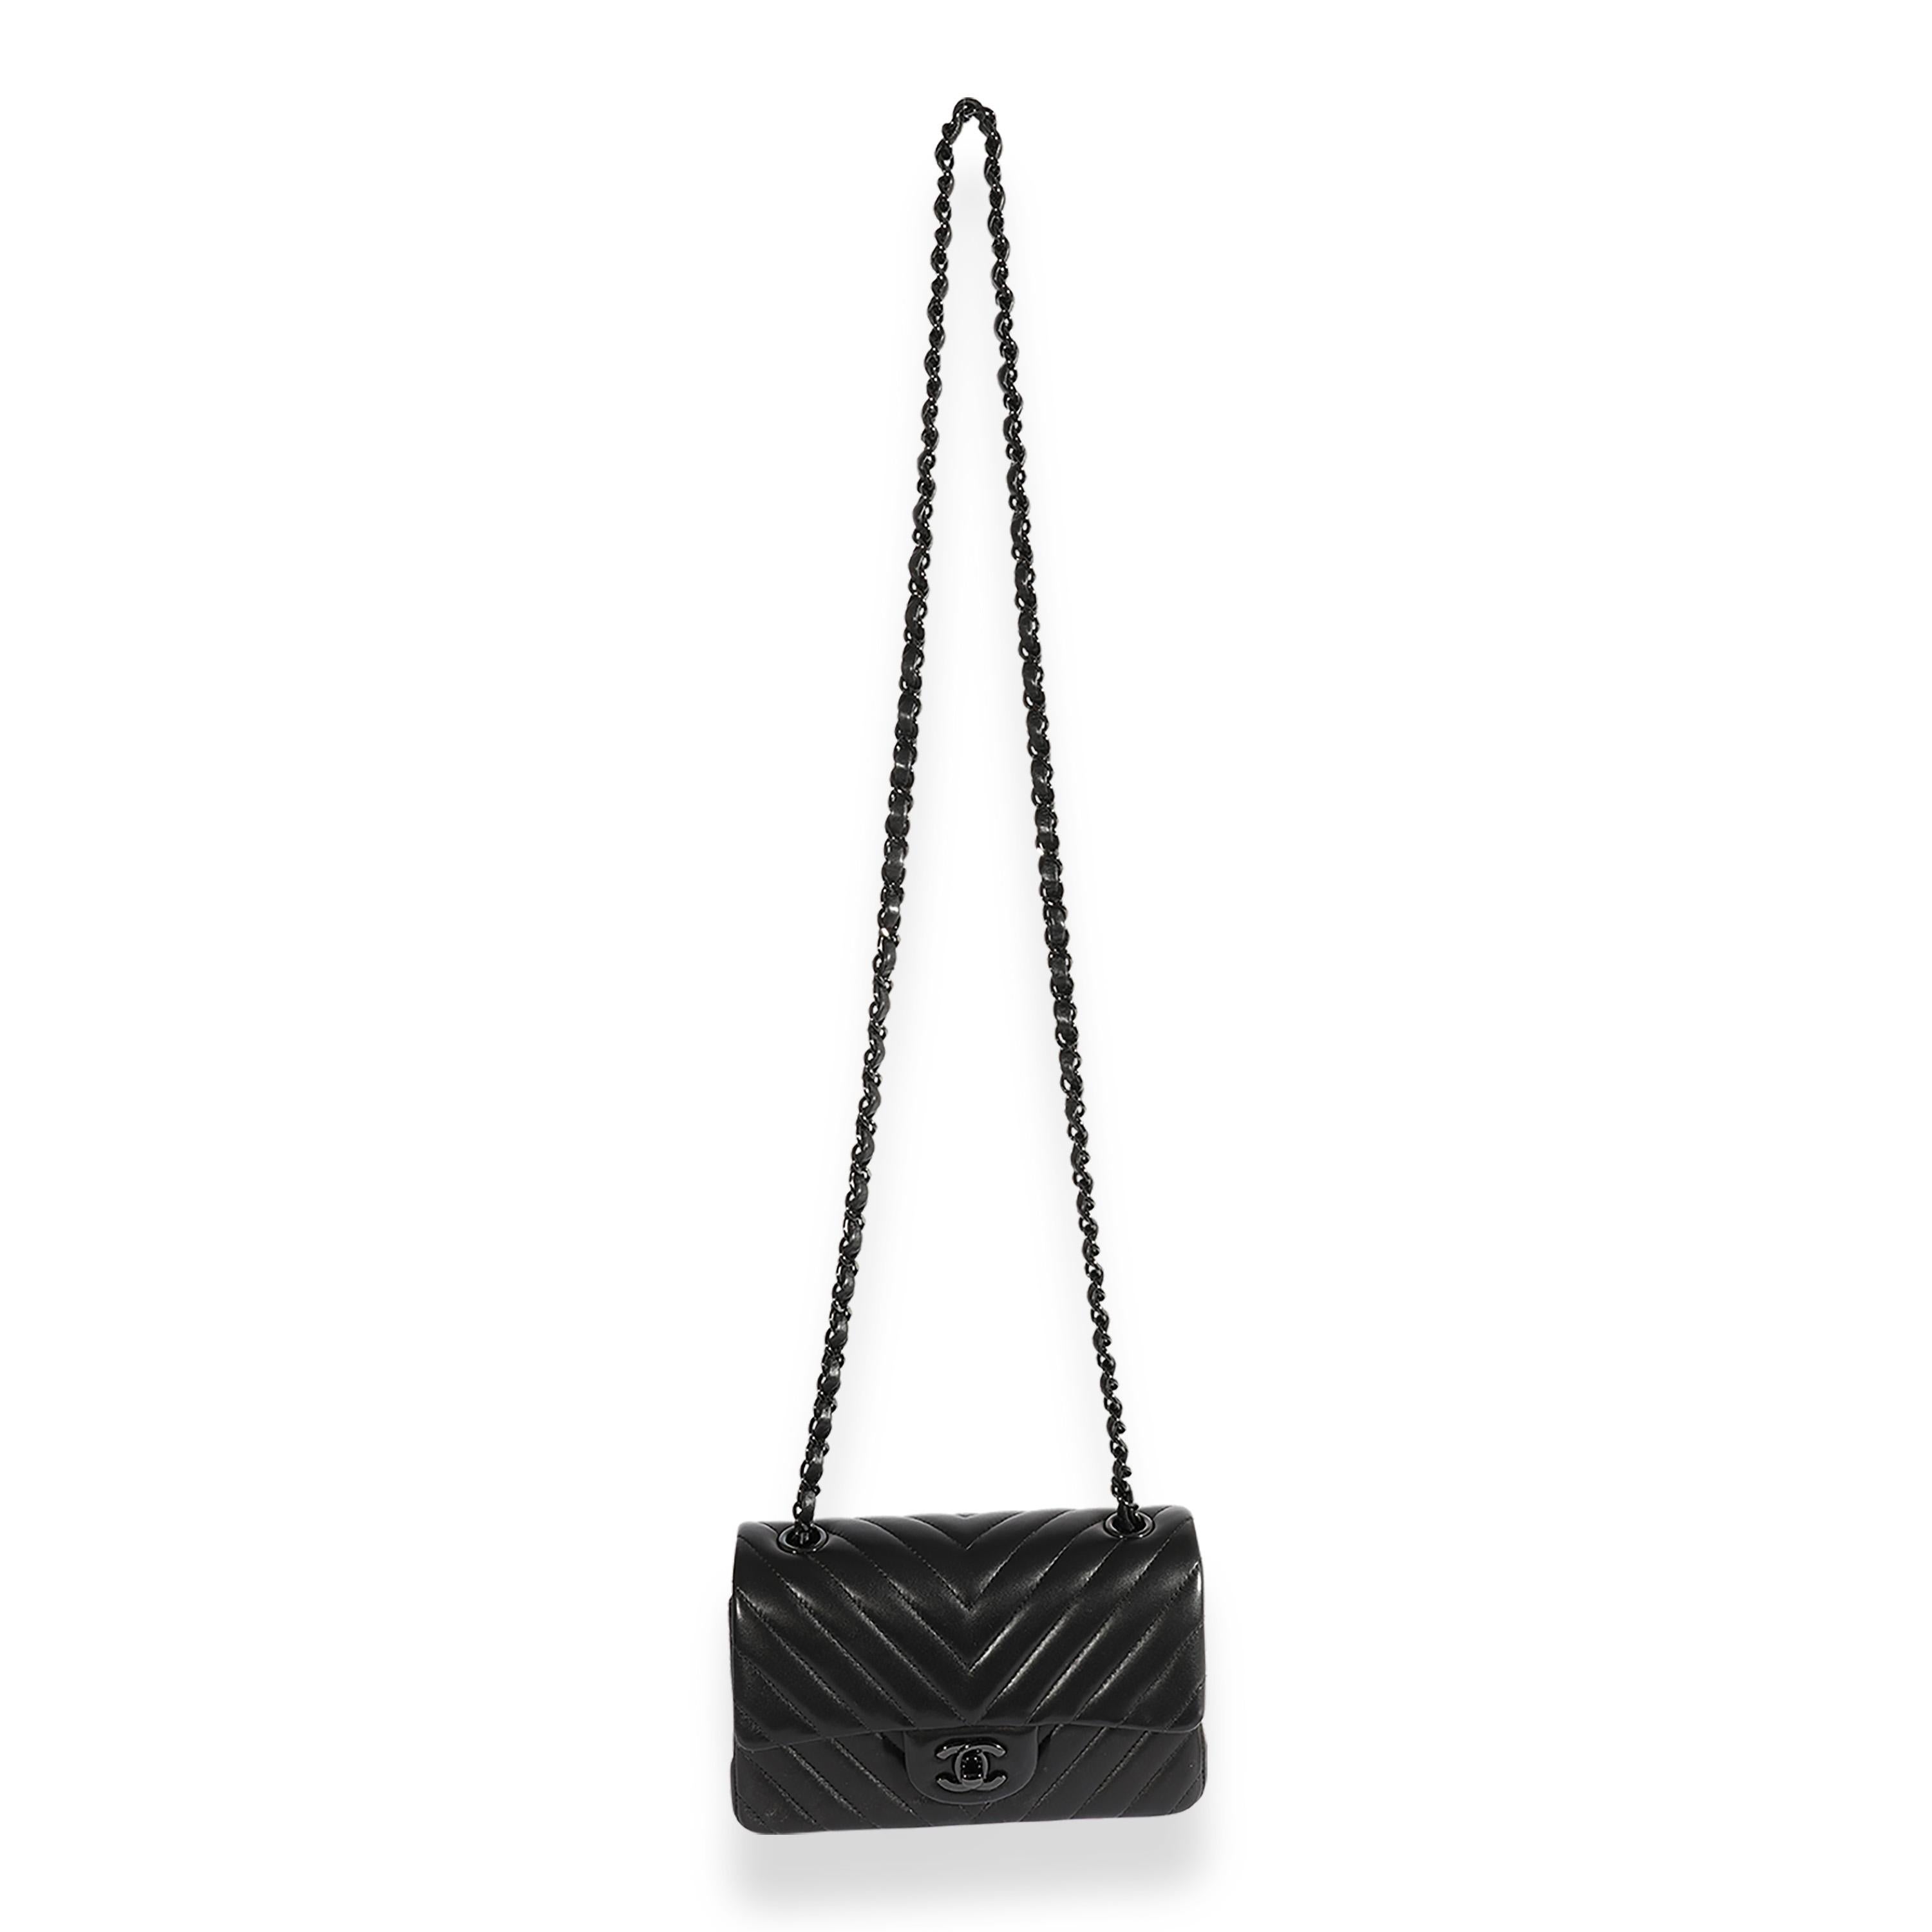 Listing Title: Chanel So Black Chevron Quilted Lambskin Mini Rectangular Classic Flap
SKU: 124204
Condition: Pre-owned 
Handbag Condition: Very Good
Condition Comments: Light scuffing throughout exterior. Faint scratching at hardware. Interior